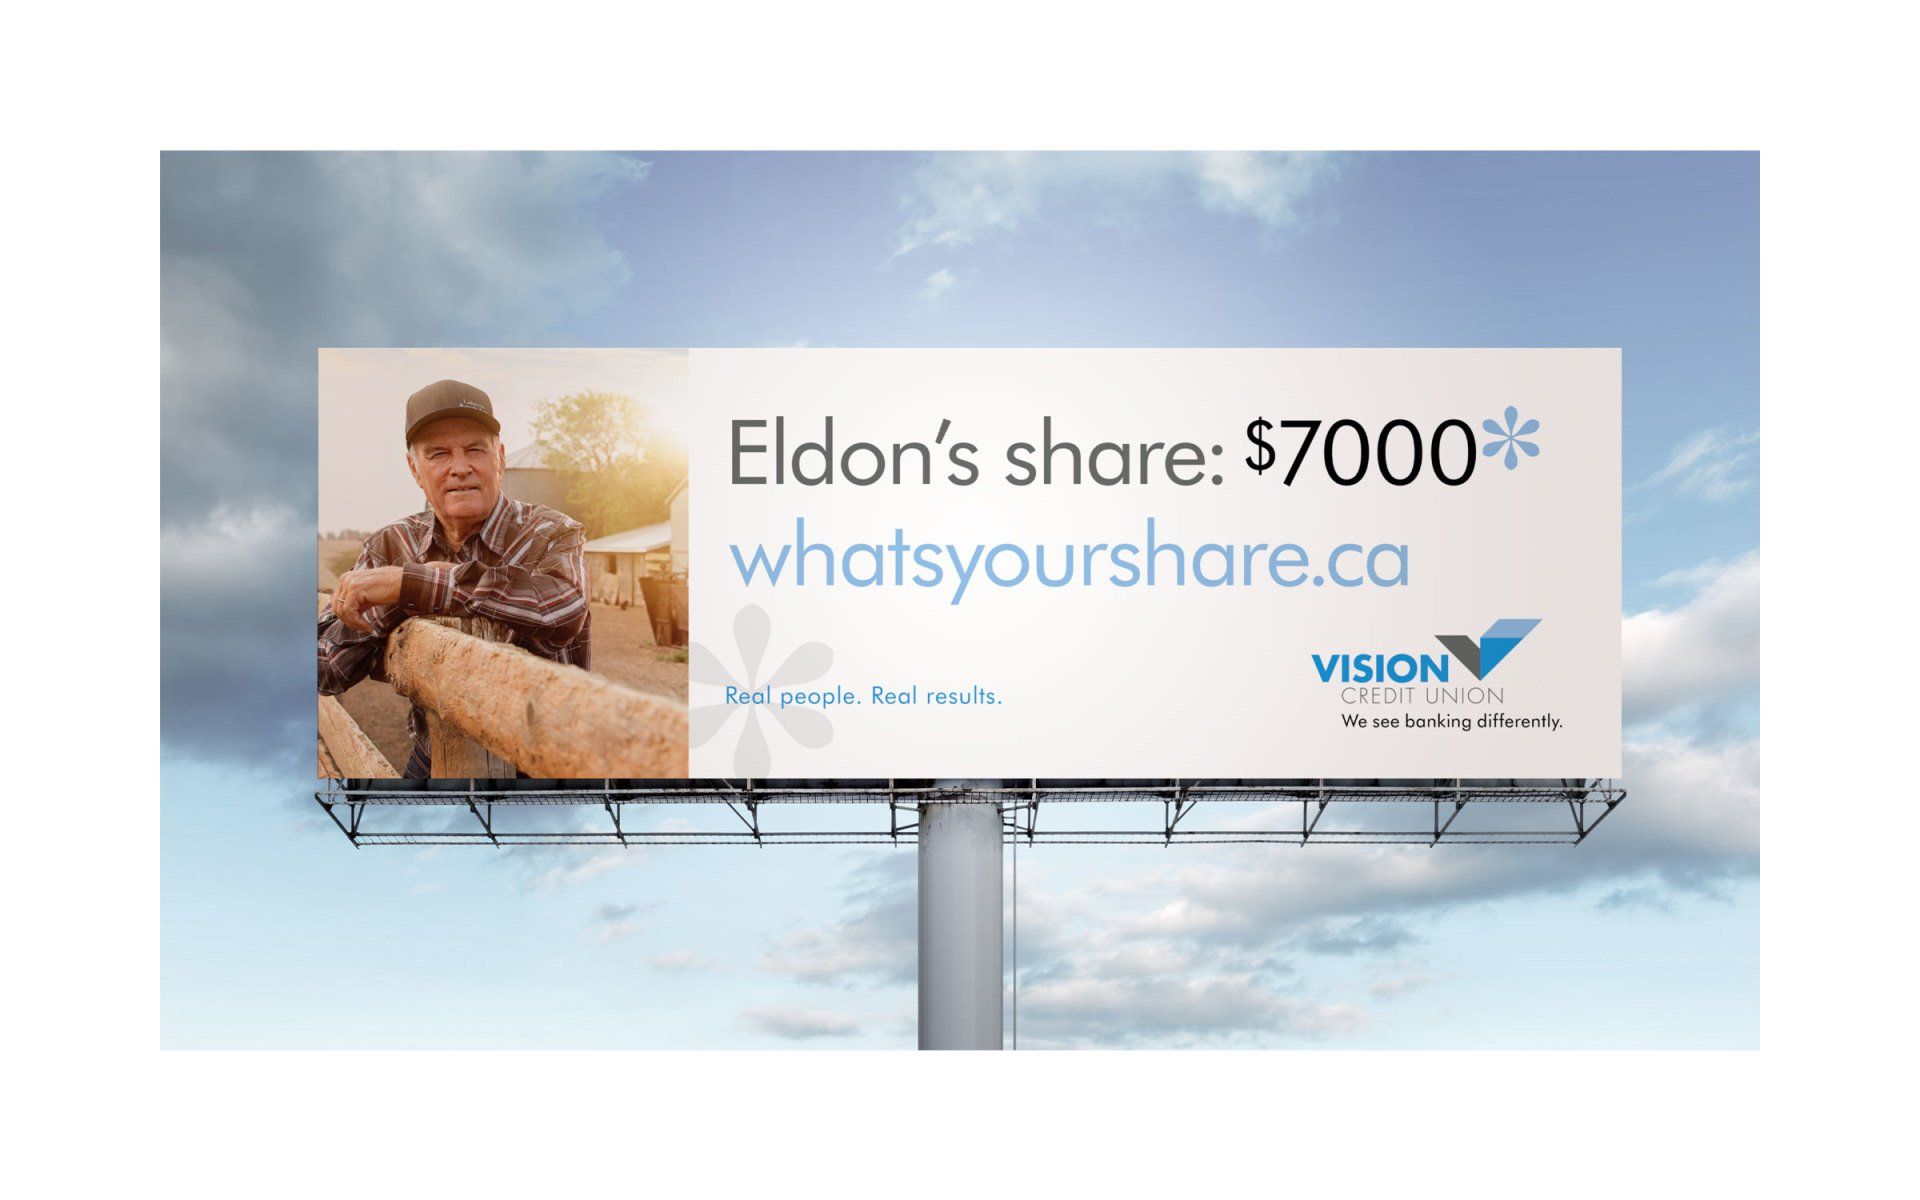 BILLBOARD ADVERTISING AND MEDIA PLACEMENT FOR VISION CREDIT UNION BY IVY DESIGN INC